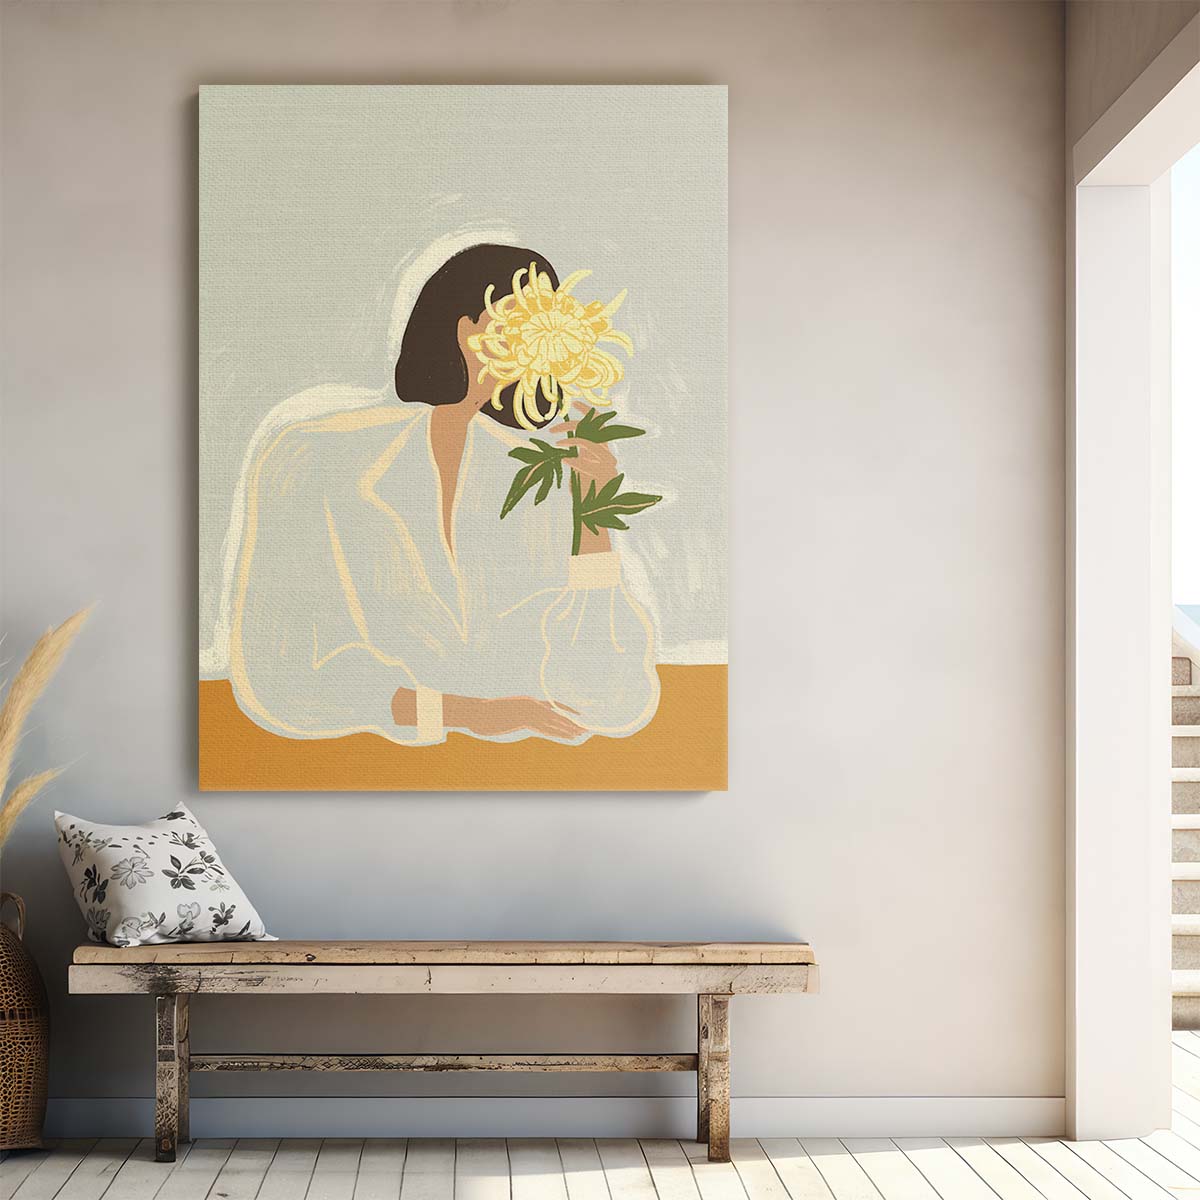 Pastel Colored Woman Sitting with Yellow Chrysanthemum Illustration by Luxuriance Designs, made in USA